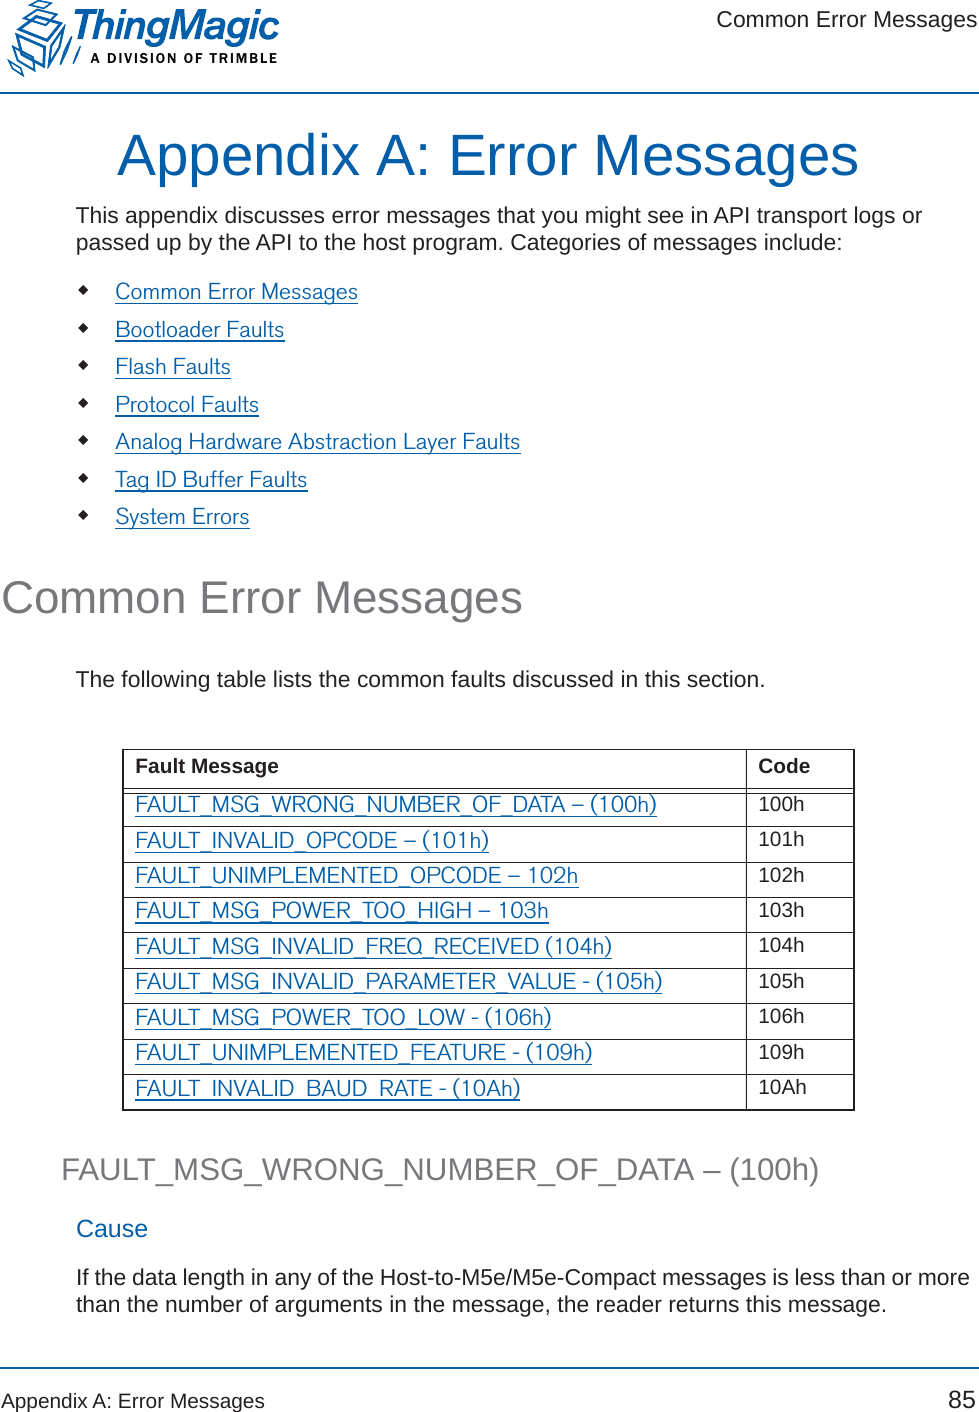 Common Error MessagesA DIVISION OF TRIMBLEAppendix A: Error Messages 85Appendix A: Error MessagesThis appendix discusses error messages that you might see in API transport logs or passed up by the API to the host program. Categories of messages include:Common Error MessagesBootloader FaultsFlash FaultsProtocol FaultsAnalog Hardware Abstraction Layer FaultsTag ID Buffer FaultsSystem ErrorsCommon Error MessagesThe following table lists the common faults discussed in this section.FAULT_MSG_WRONG_NUMBER_OF_DATA – (100h)CauseIf the data length in any of the Host-to-M5e/M5e-Compact messages is less than or more than the number of arguments in the message, the reader returns this message.Fault Message CodeFAULT_MSG_WRONG_NUMBER_OF_DATA – (100h) 100hFAULT_INVALID_OPCODE – (101h) 101hFAULT_UNIMPLEMENTED_OPCODE – 102h 102hFAULT_MSG_POWER_TOO_HIGH – 103h 103hFAULT_MSG_INVALID_FREQ_RECEIVED (104h) 104hFAULT_MSG_INVALID_PARAMETER_VALUE - (105h) 105hFAULT_MSG_POWER_TOO_LOW - (106h) 106hFAULT_UNIMPLEMENTED_FEATURE - (109h) 109hFAULT_INVALID_BAUD_RATE - (10Ah) 10Ah